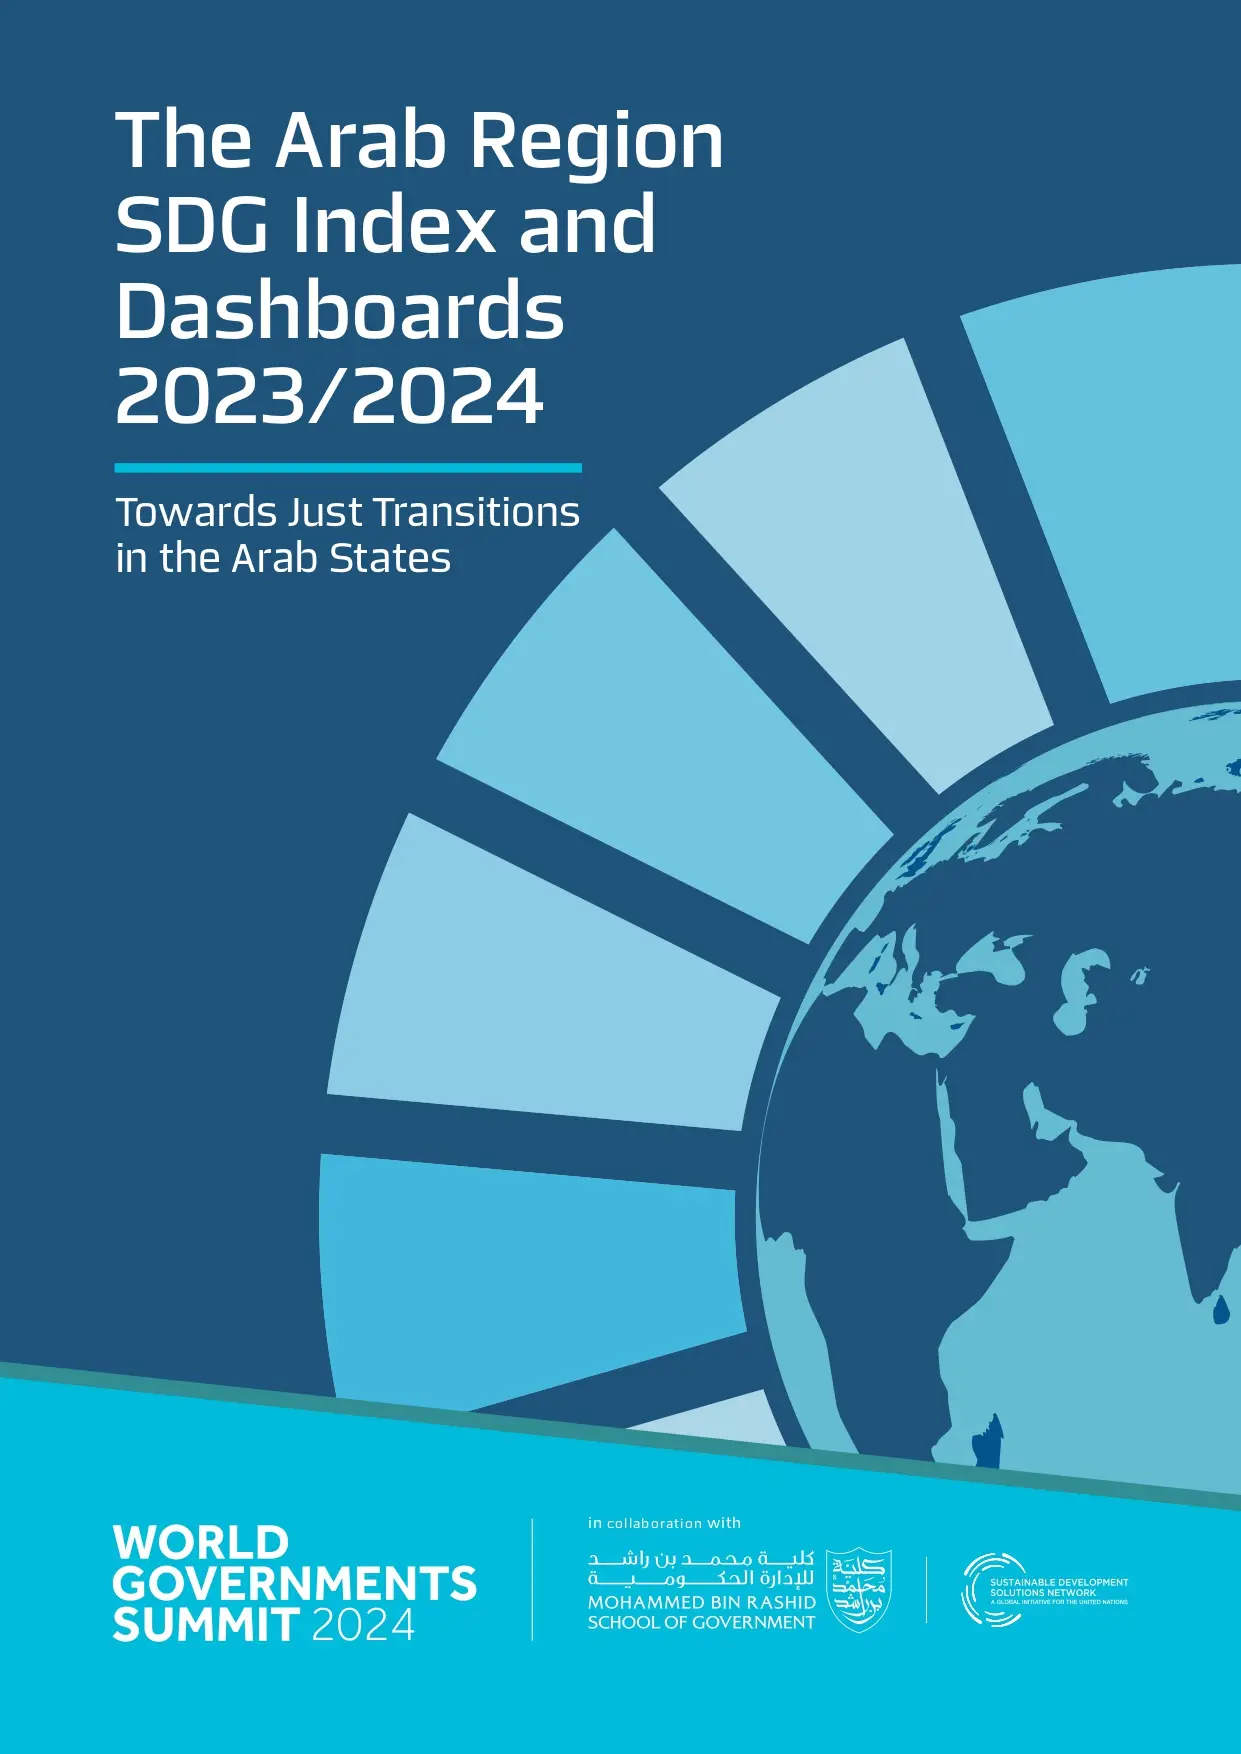 The Arab Region SDG Index and Dashboards 2023/2024